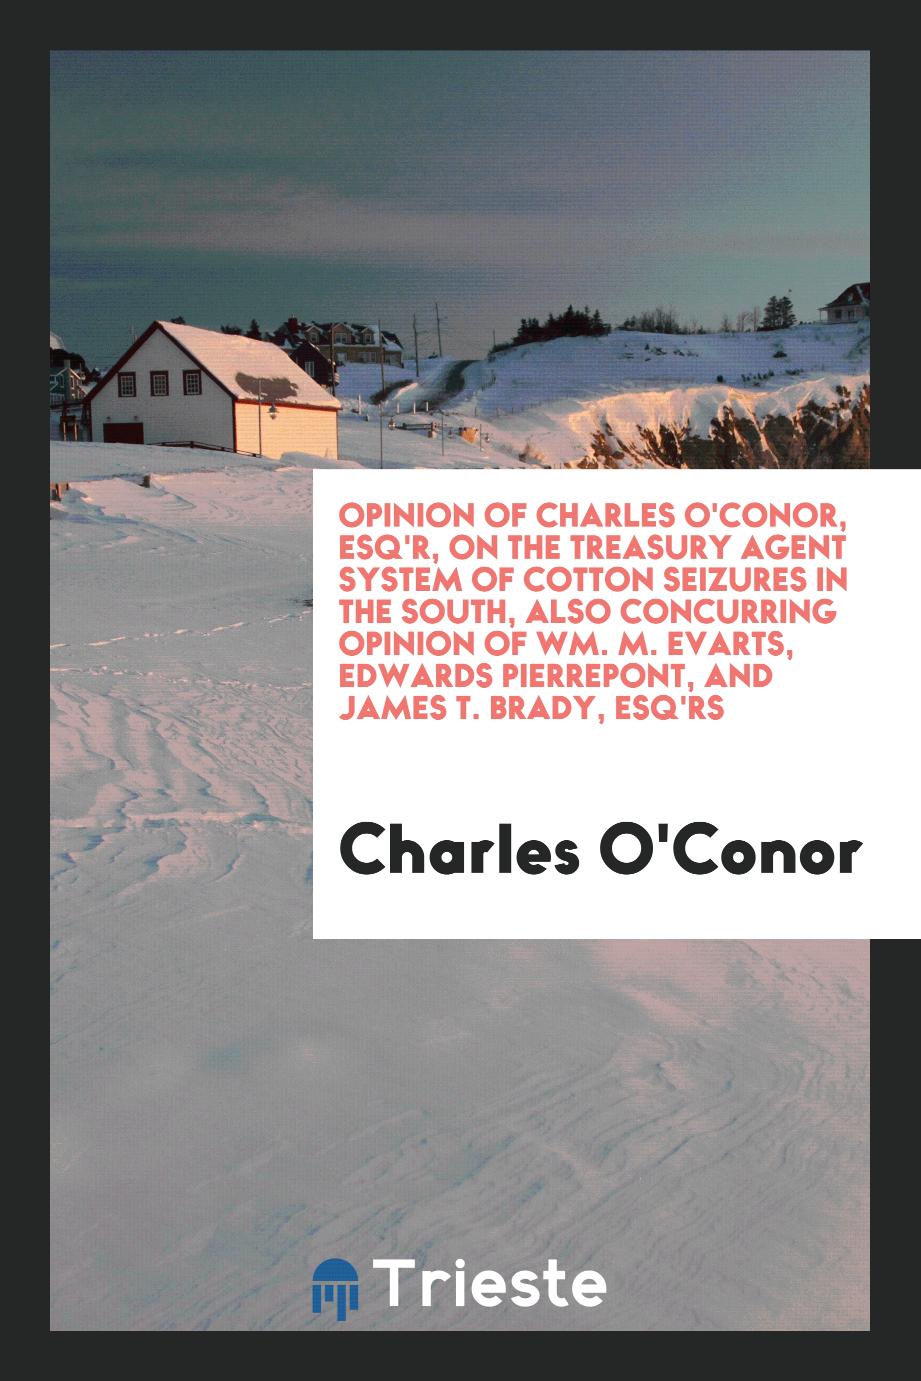 Opinion of Charles O'Conor, Esq'r, on the treasury agent system of cotton seizures in the South, also concurring opinion of Wm. M. Evarts, Edwards Pierrepont, and James T. Brady, Esq'rs